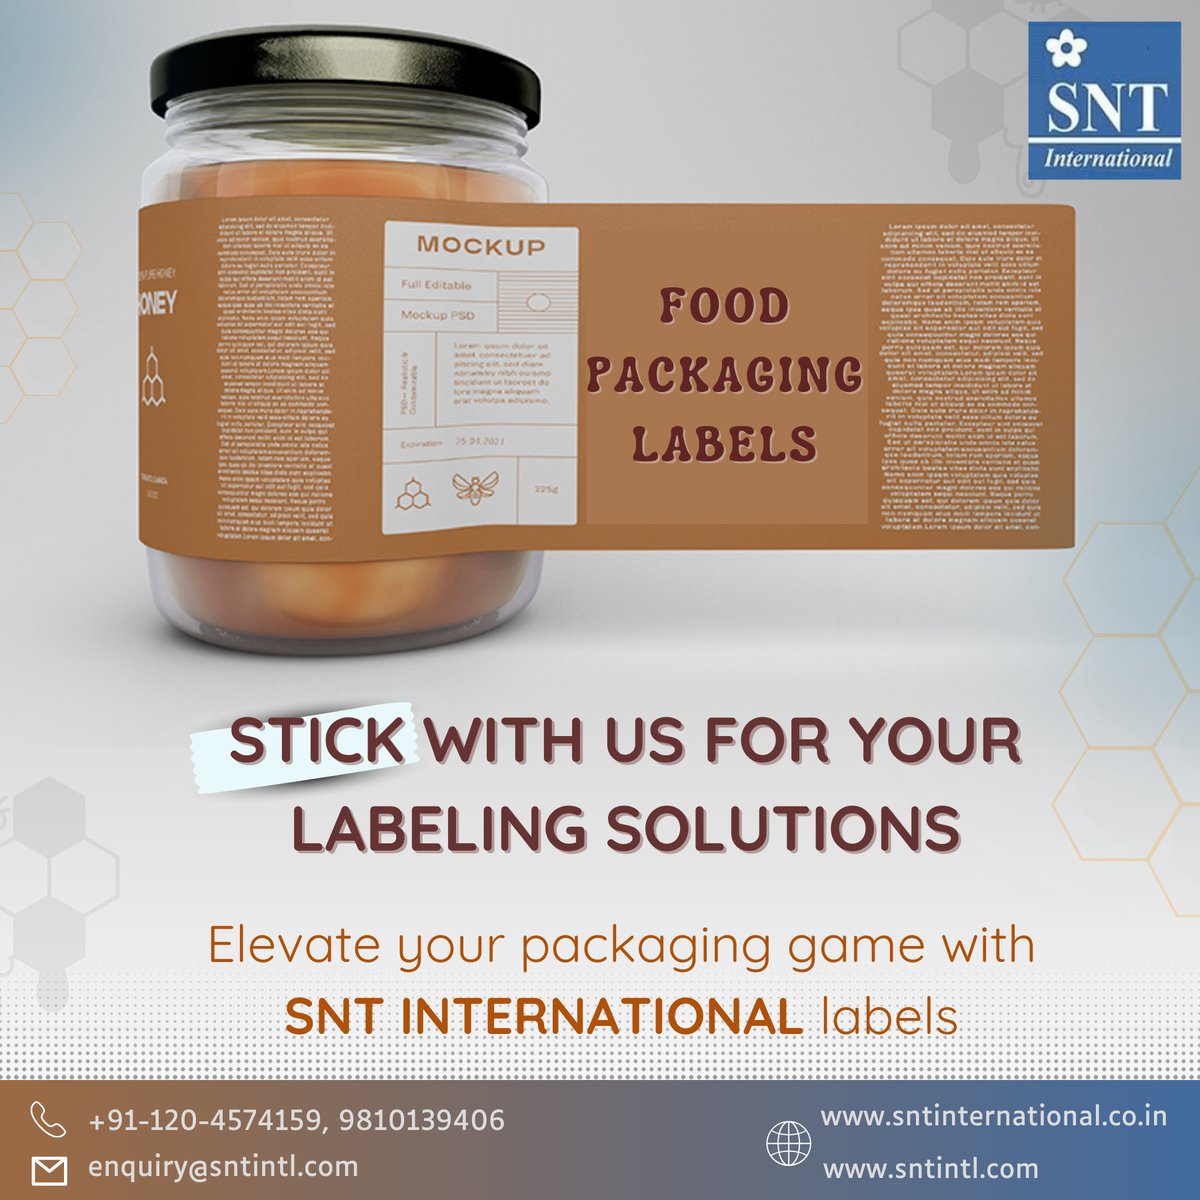 Customized Food Labels for various packaging.
We offer fully customized food labels crafted of durable, waterproof materials.
#foodlabels #customized #printsolutions #printingindustry #printindustry #barcode #printingservice #printingcompany #printingservices #barcodes